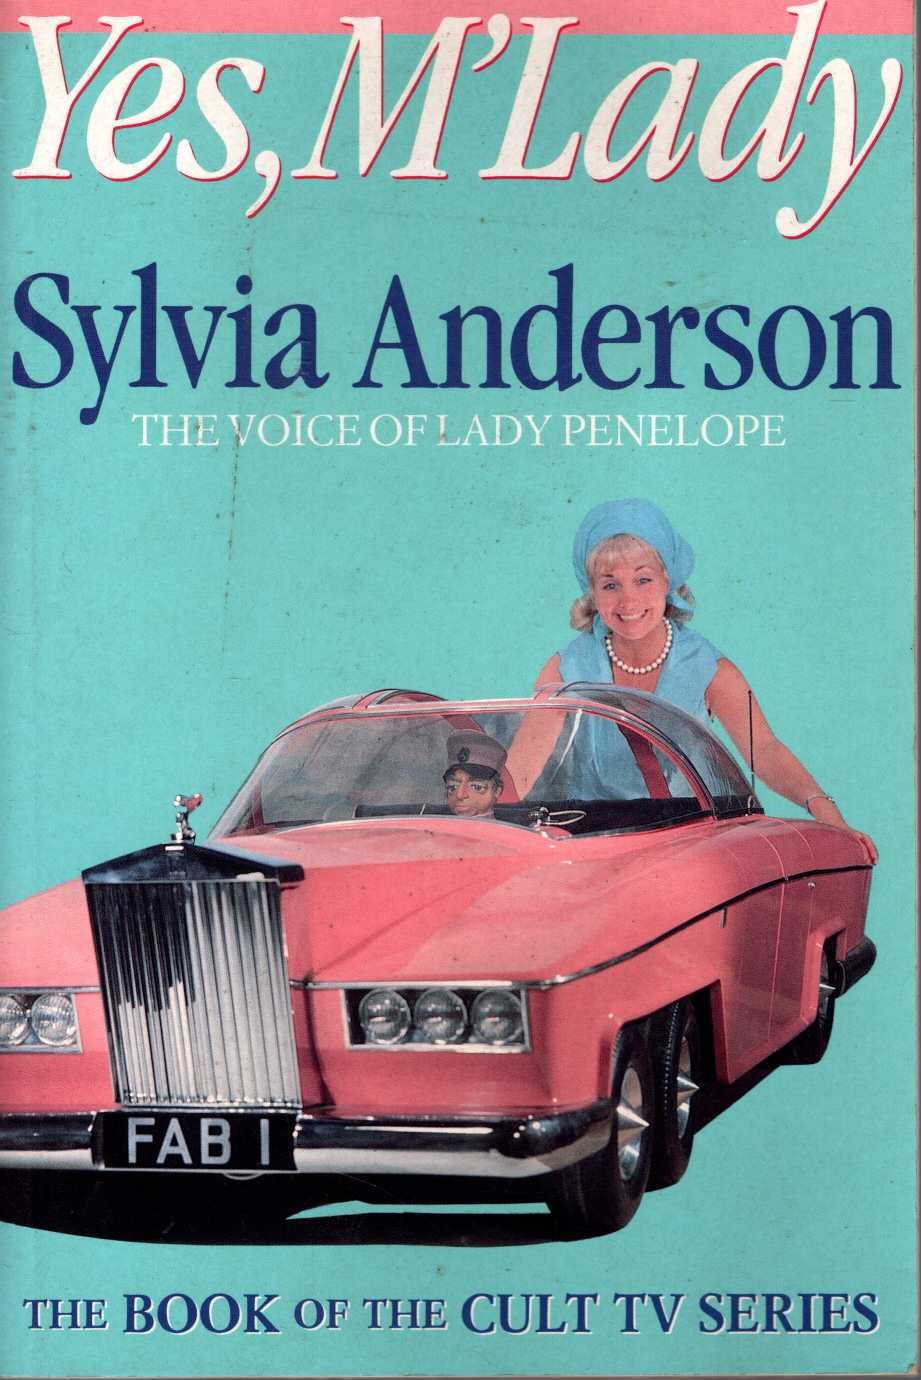 Sylvia Anderson  YES, M'LADY. The Voice of Lady Penelope (The book of the cult TV series) front book cover image